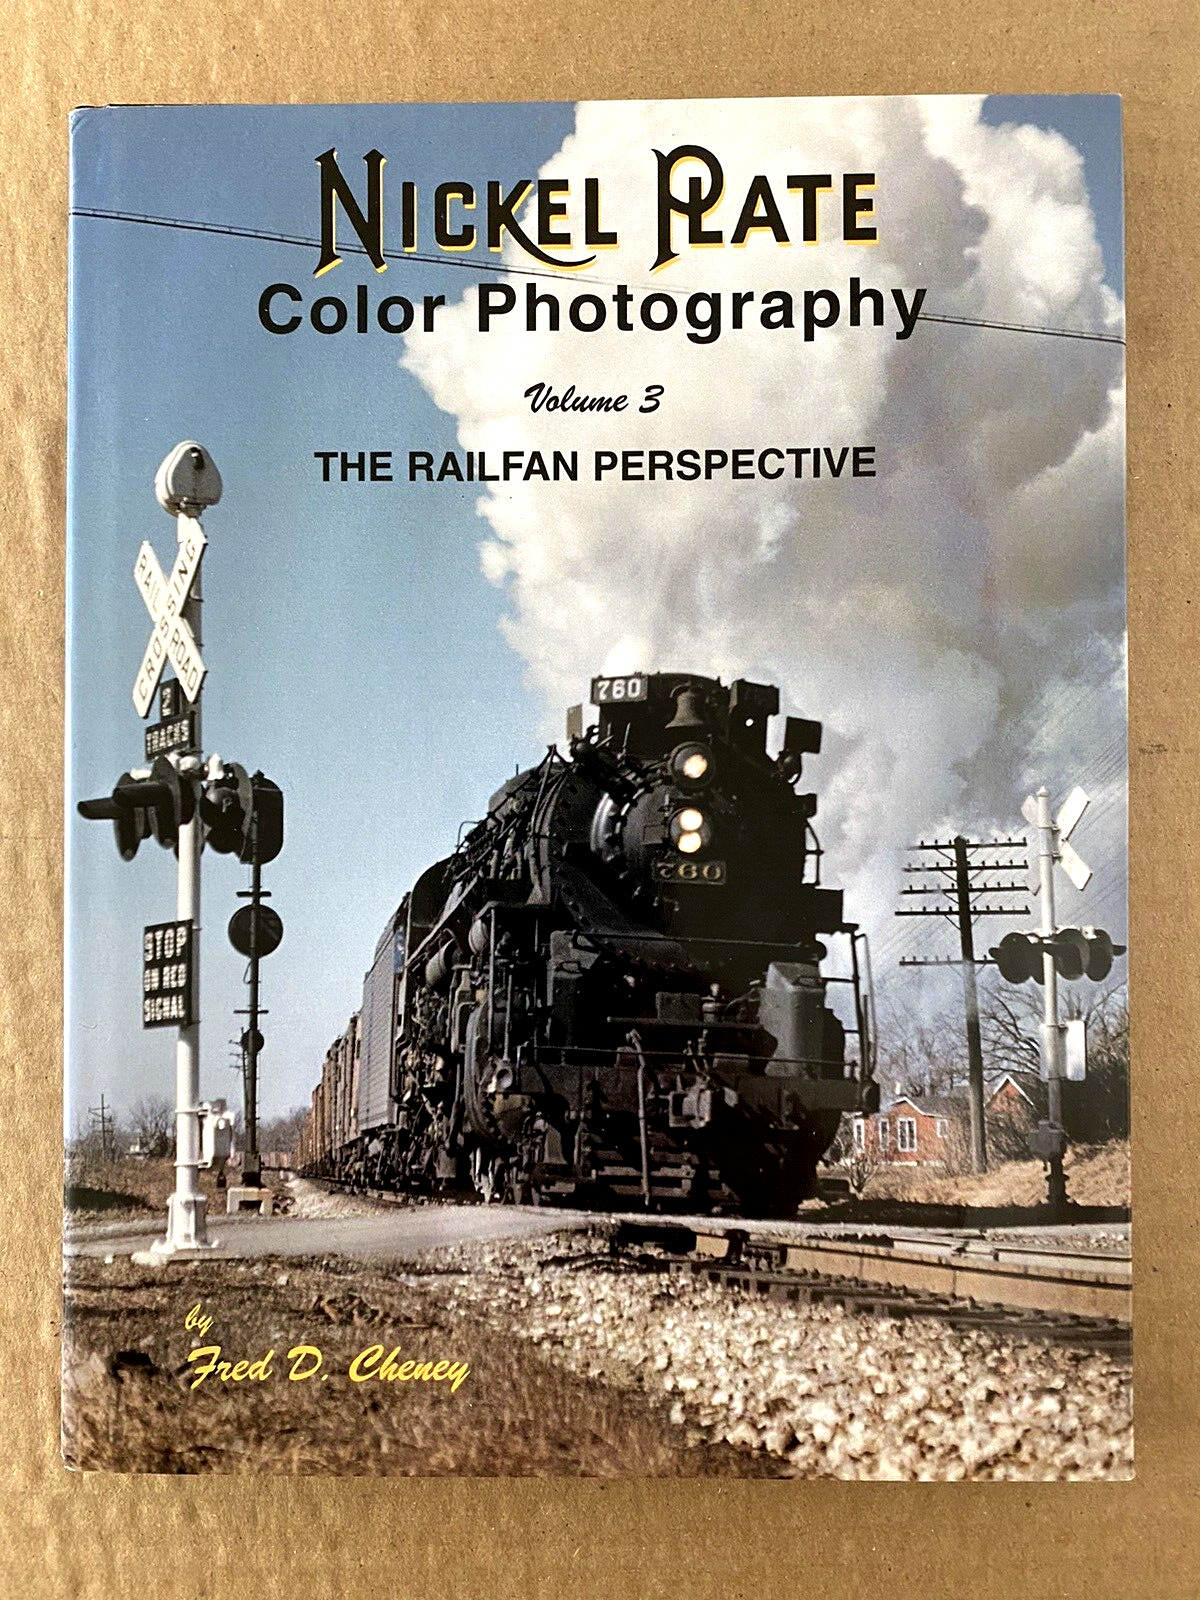 Nickel Plate Color Photography Volume 3: The Railfan Perspective (1997) - Cheney